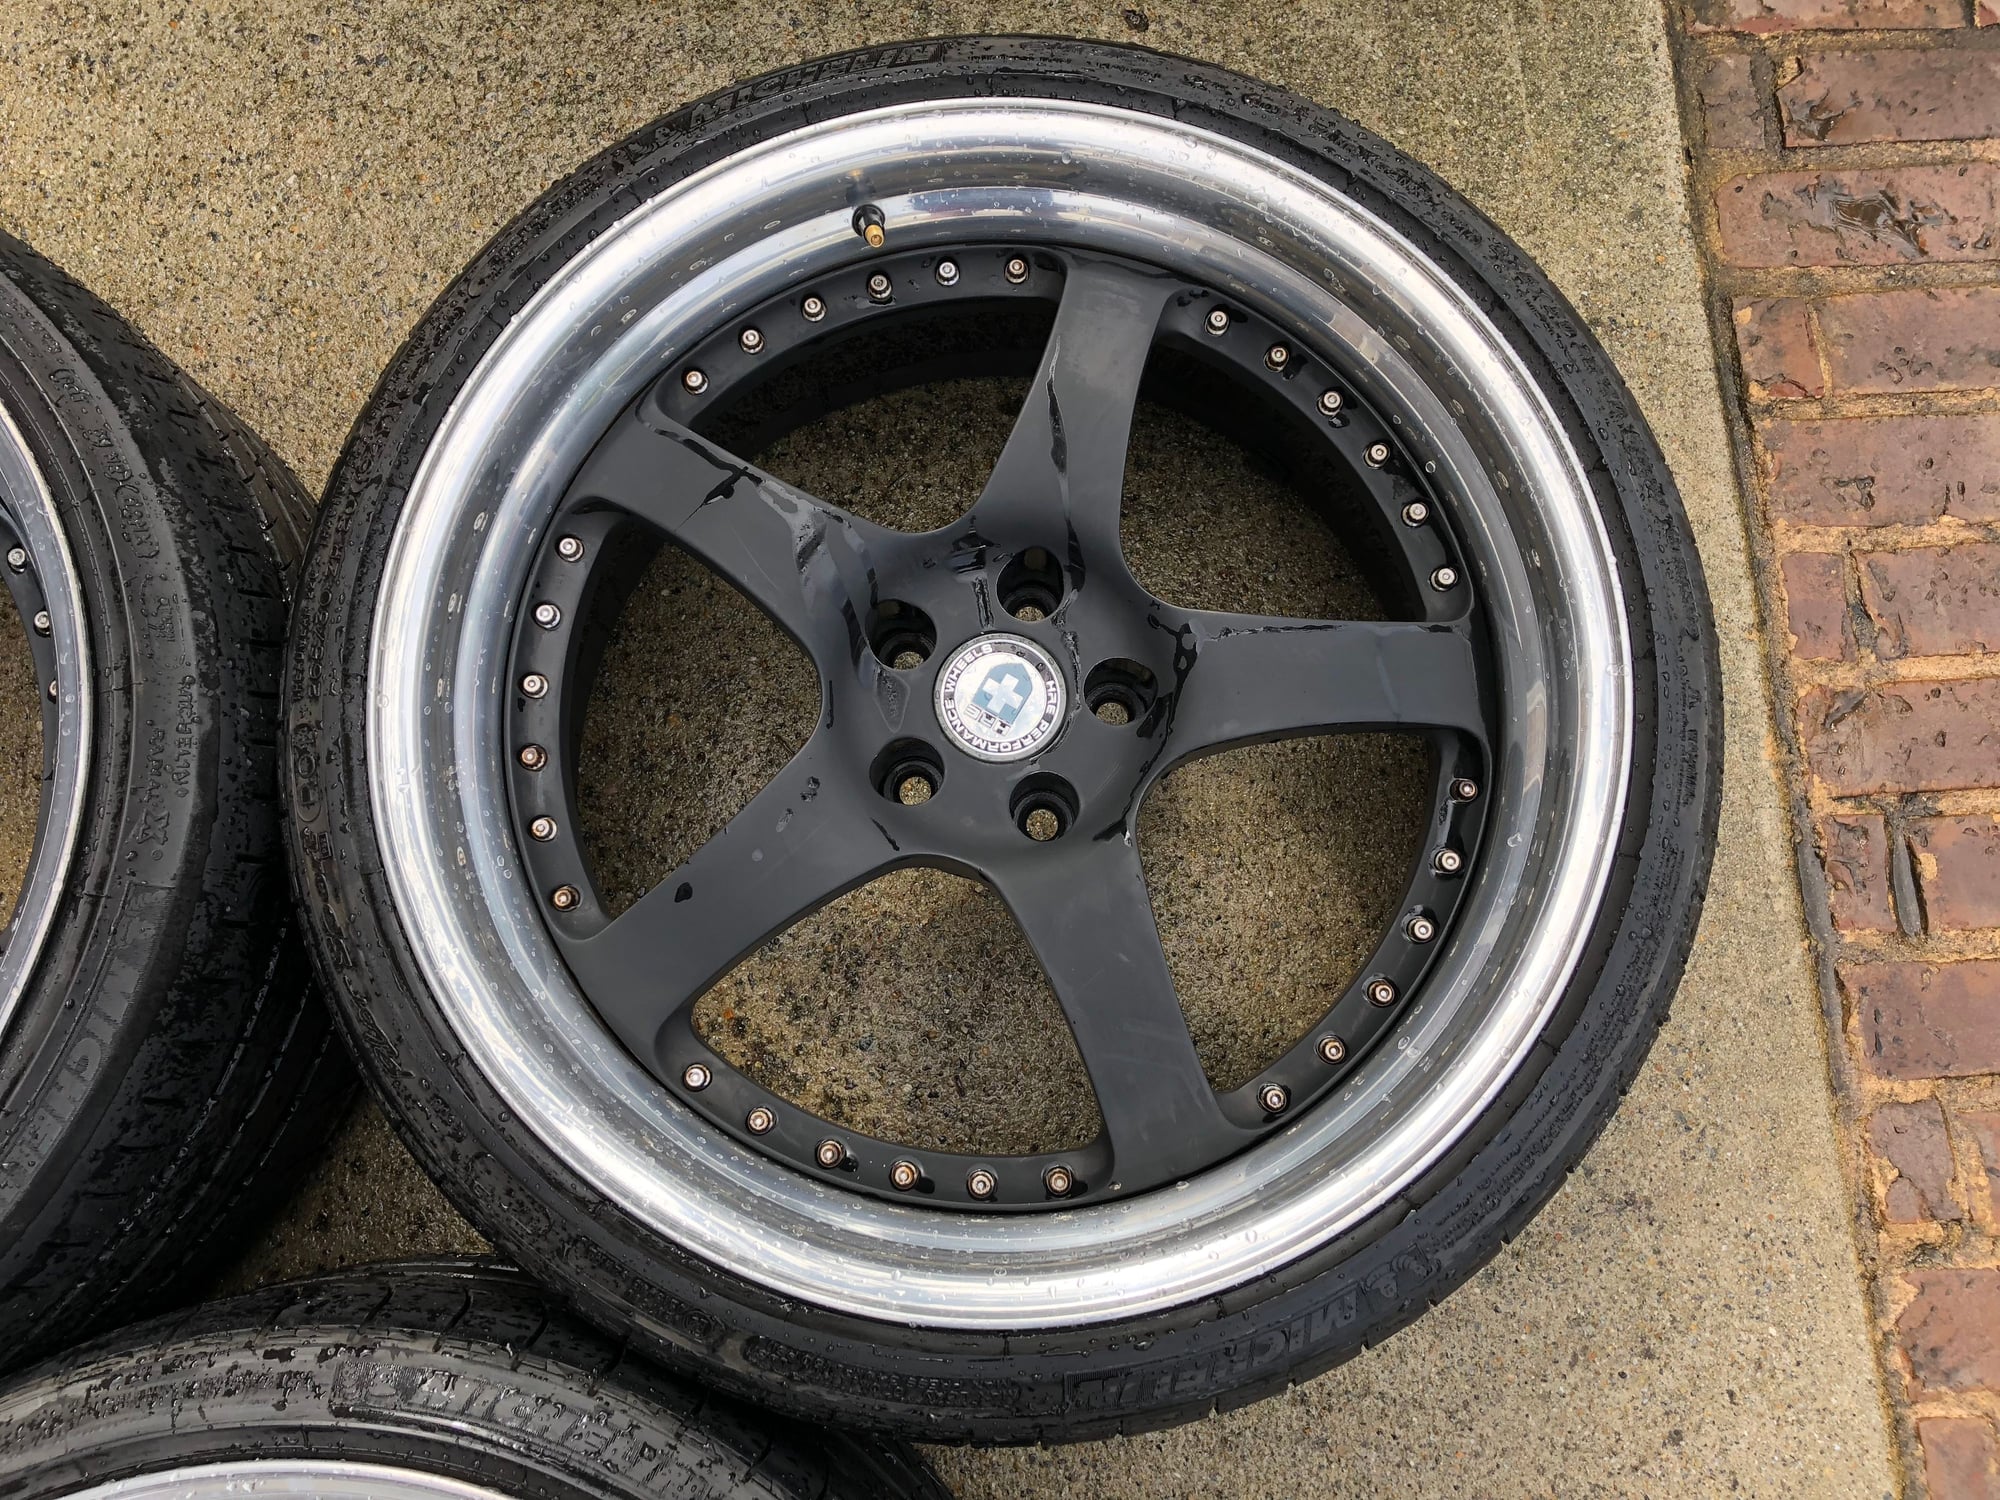 Wheels and Tires/Axles - HRE 545 10x10/10.5 3 Piece Wheels with Michelin Tires - Used - All Years Mercedes-Benz All Models - All Years Audi All Models - All Years Volkswagen All Models - Duluth, GA 30096, United States